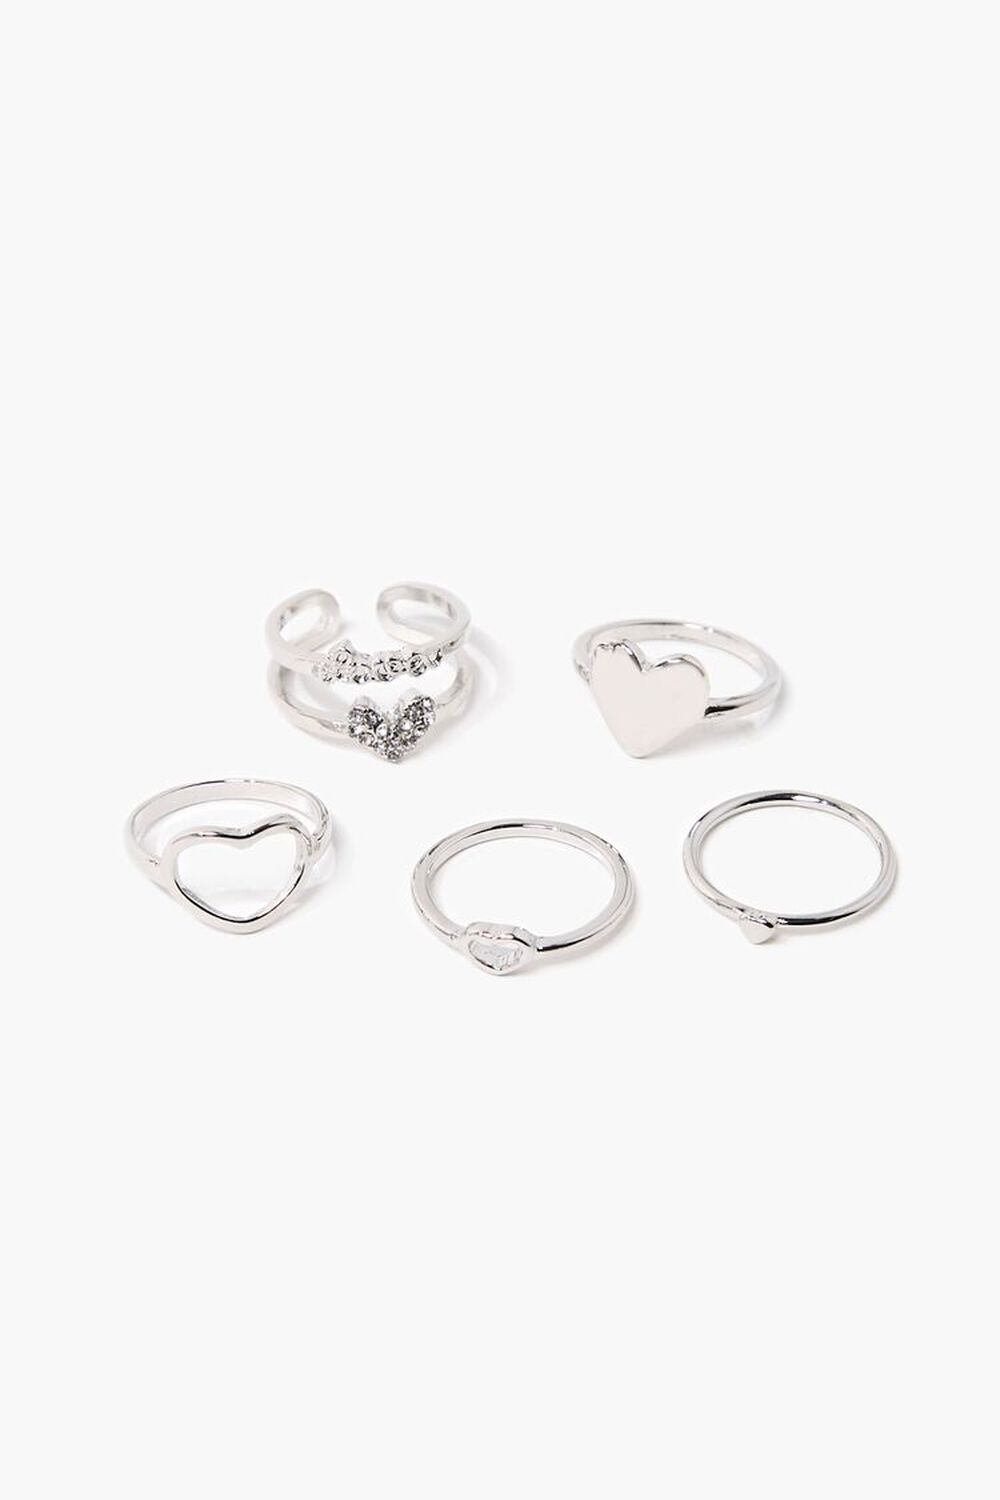 SILVER Heart Charm Ring Set, image 1